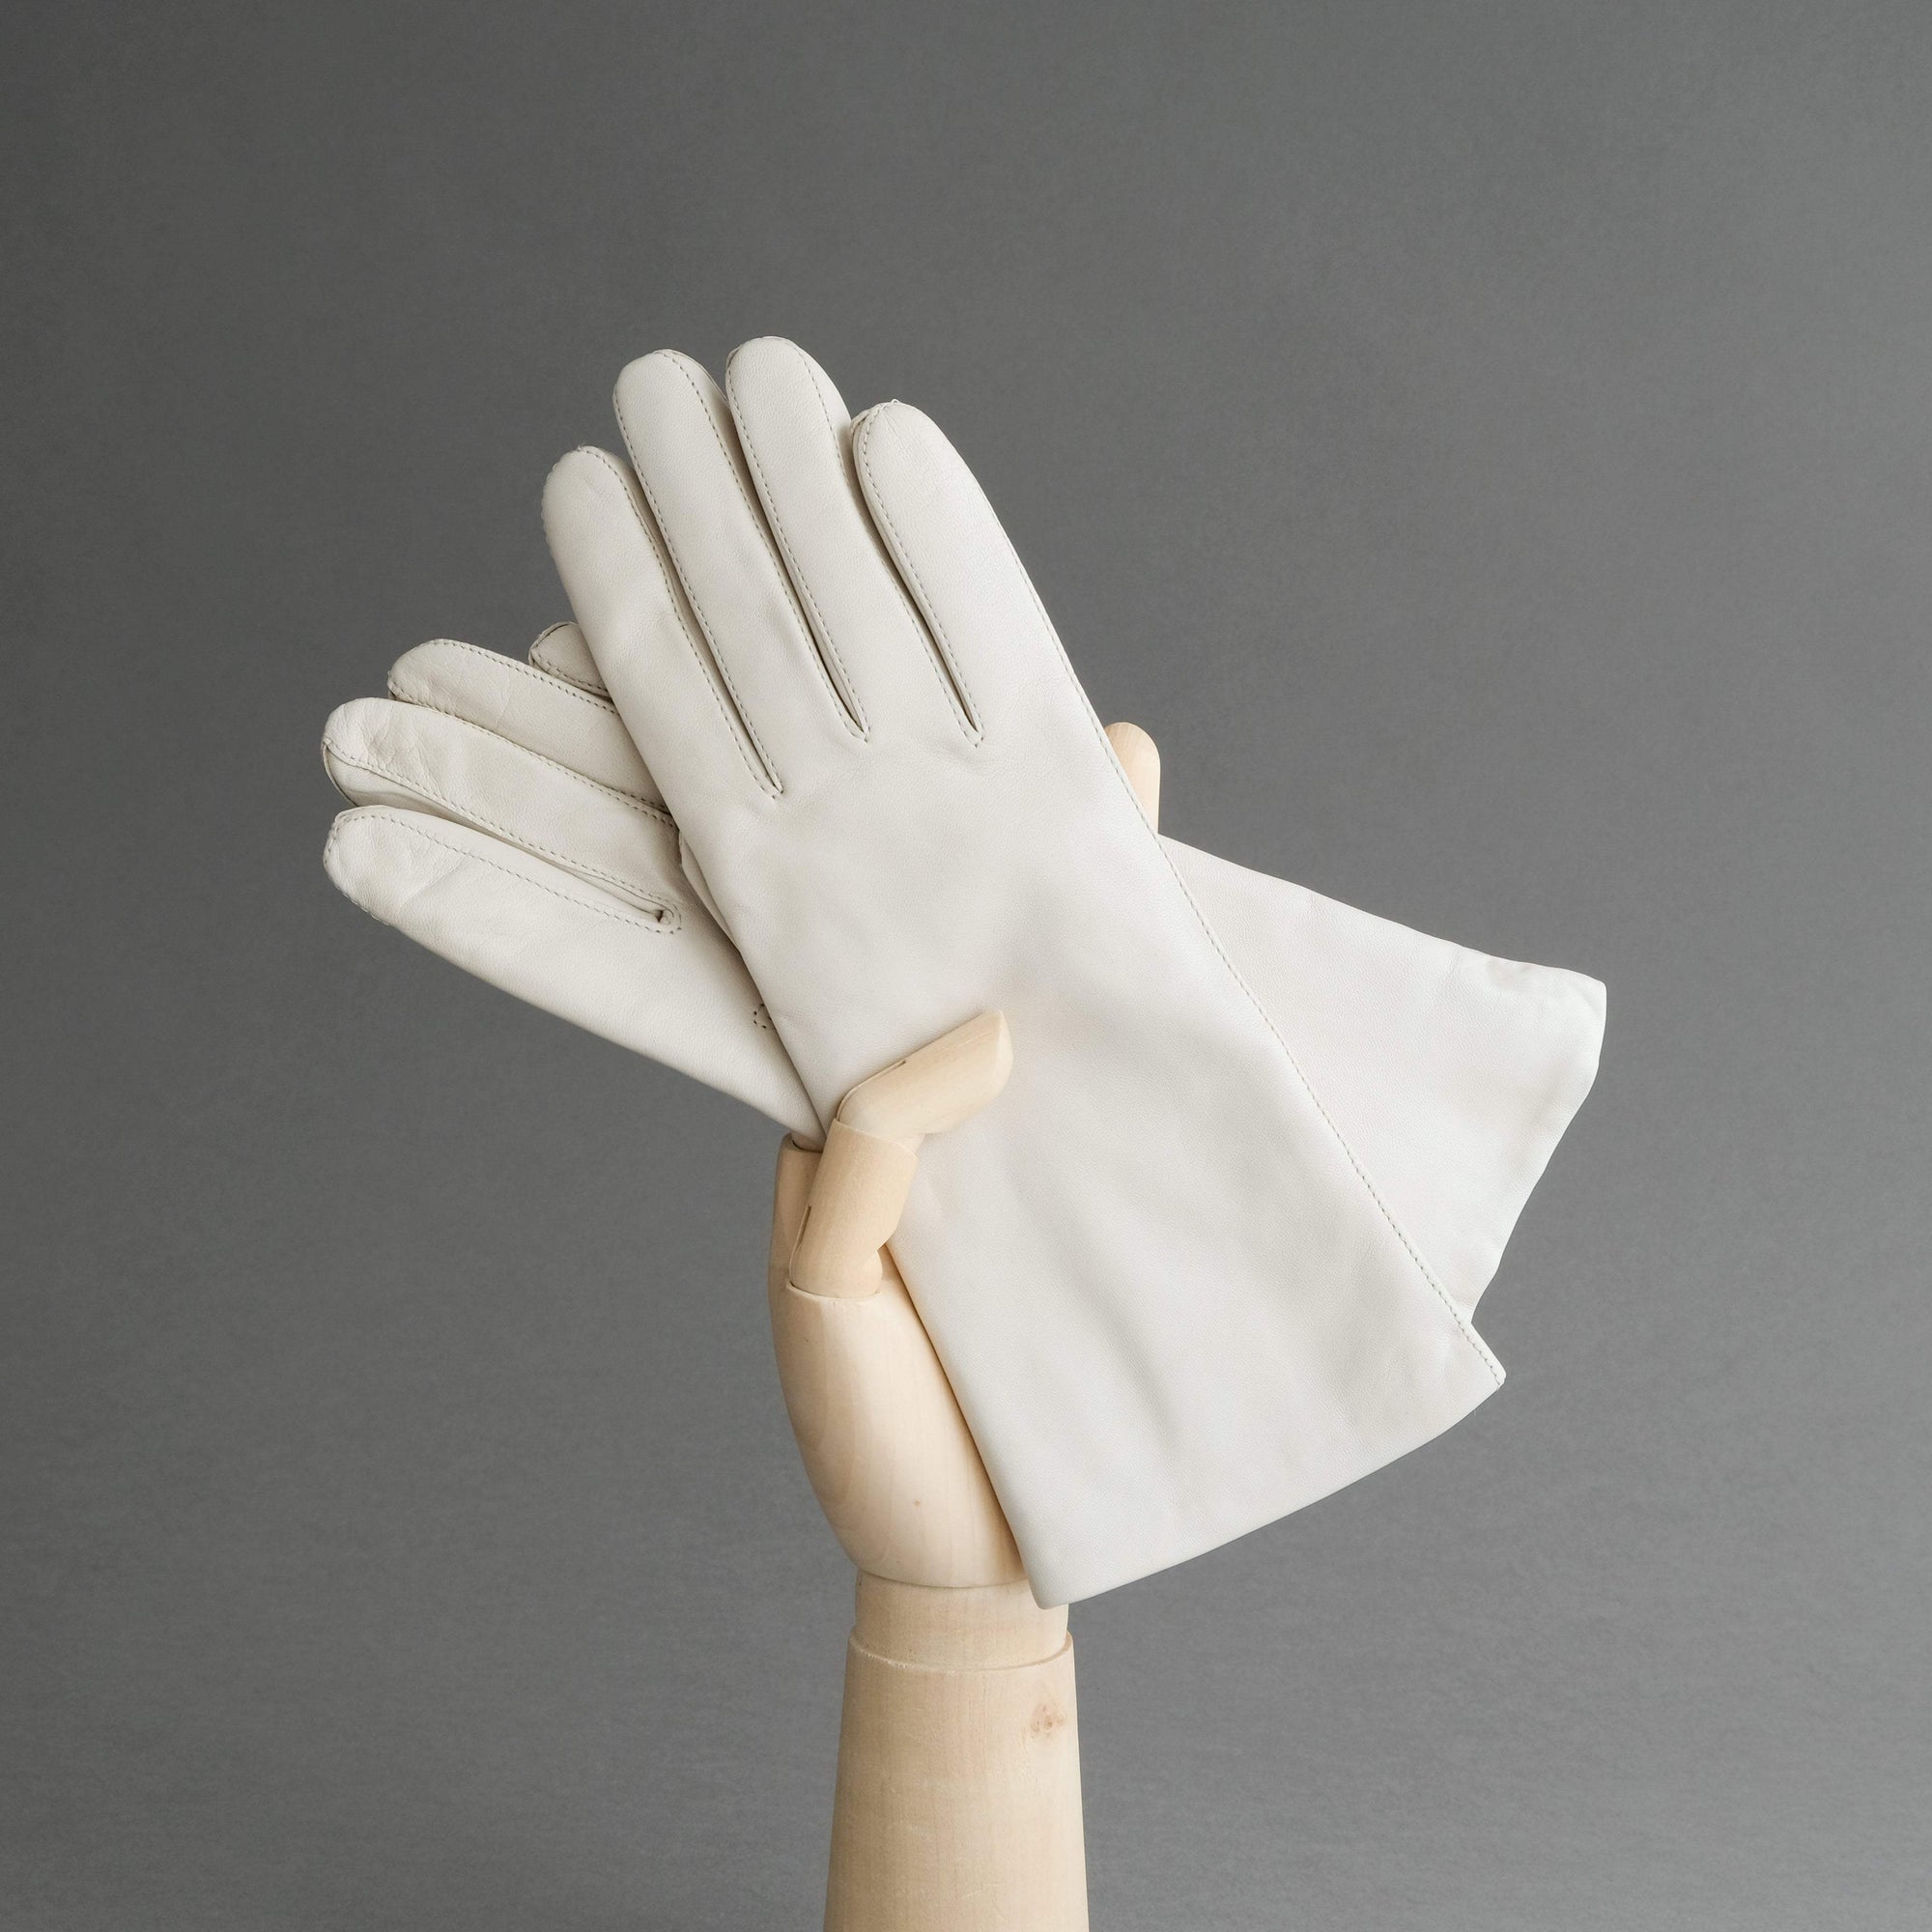 Ladies Gloves from Hair Sheep Nappa Lined with Cashmere - TR Handschuhe Wien - Thomas Riemer Handmade Gloves